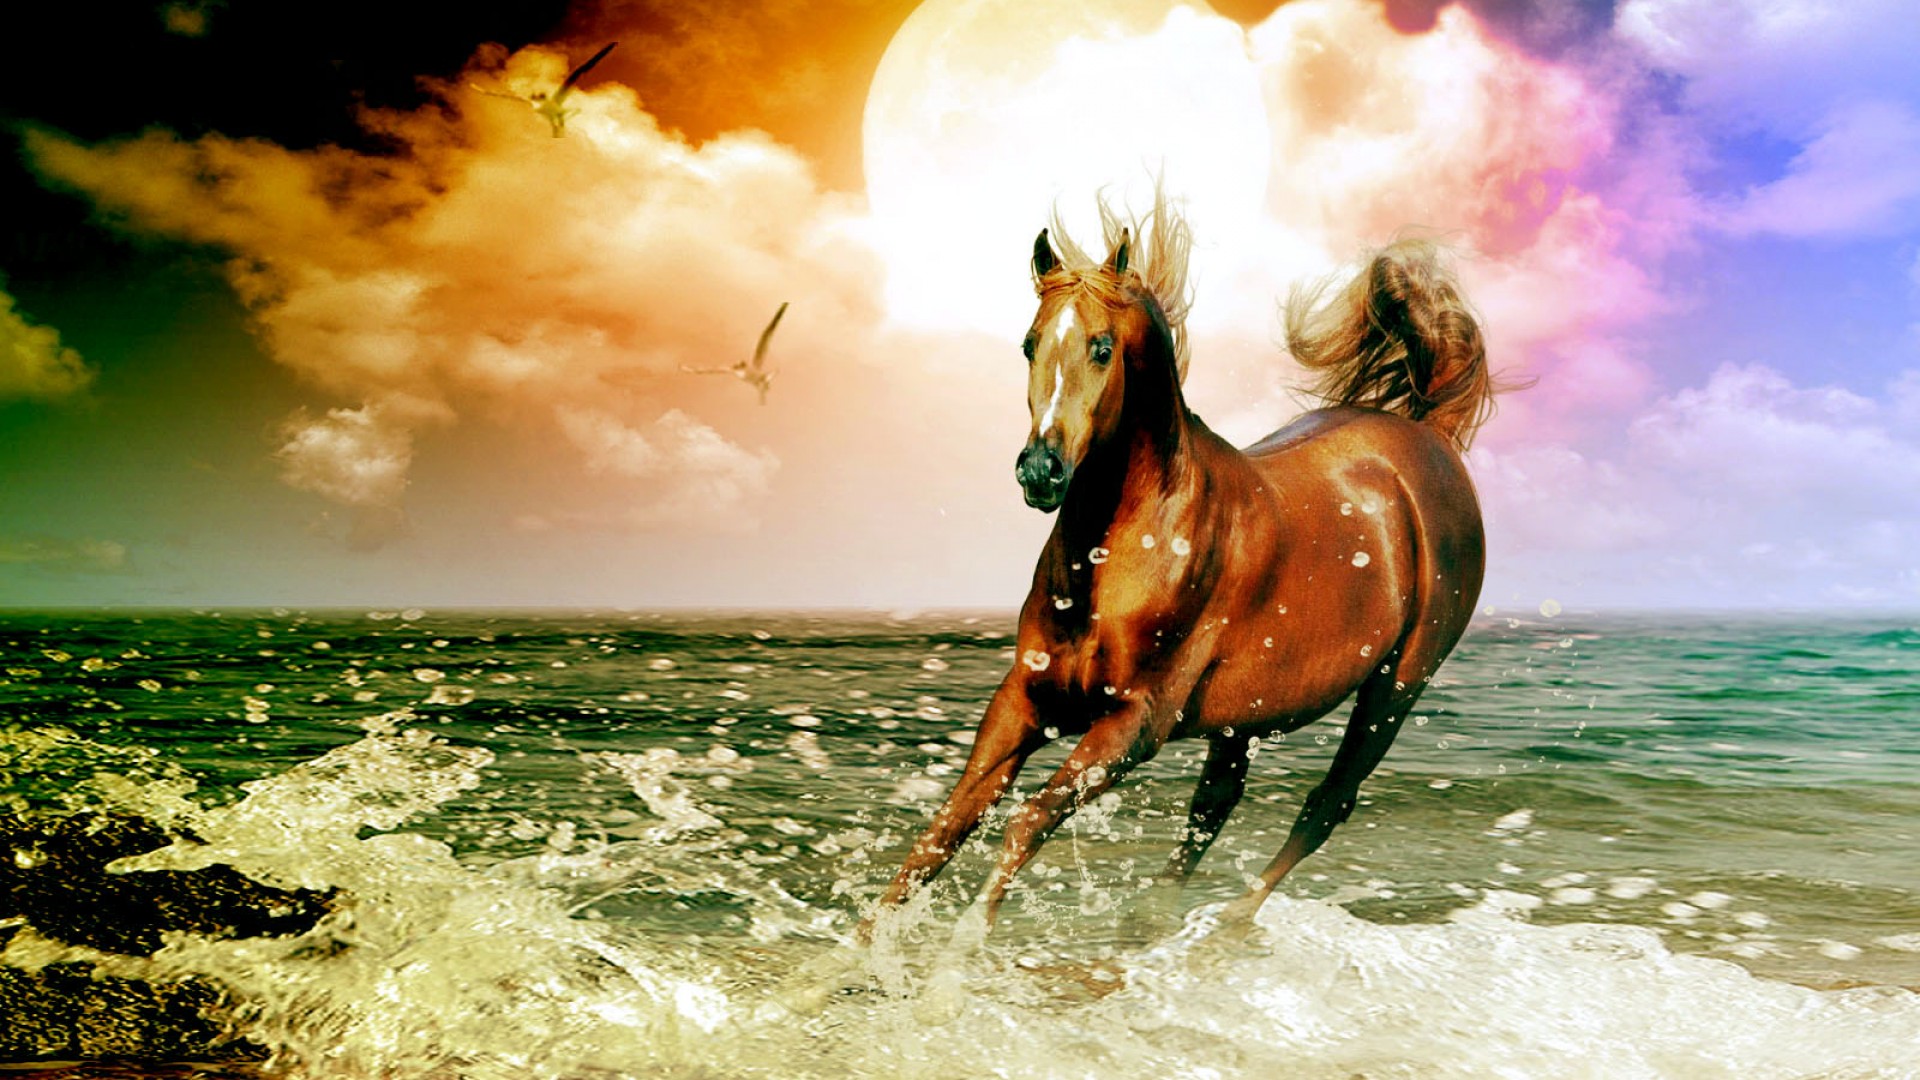 Arabian Horse Beach Desktop Wallpaper And Make This For Your